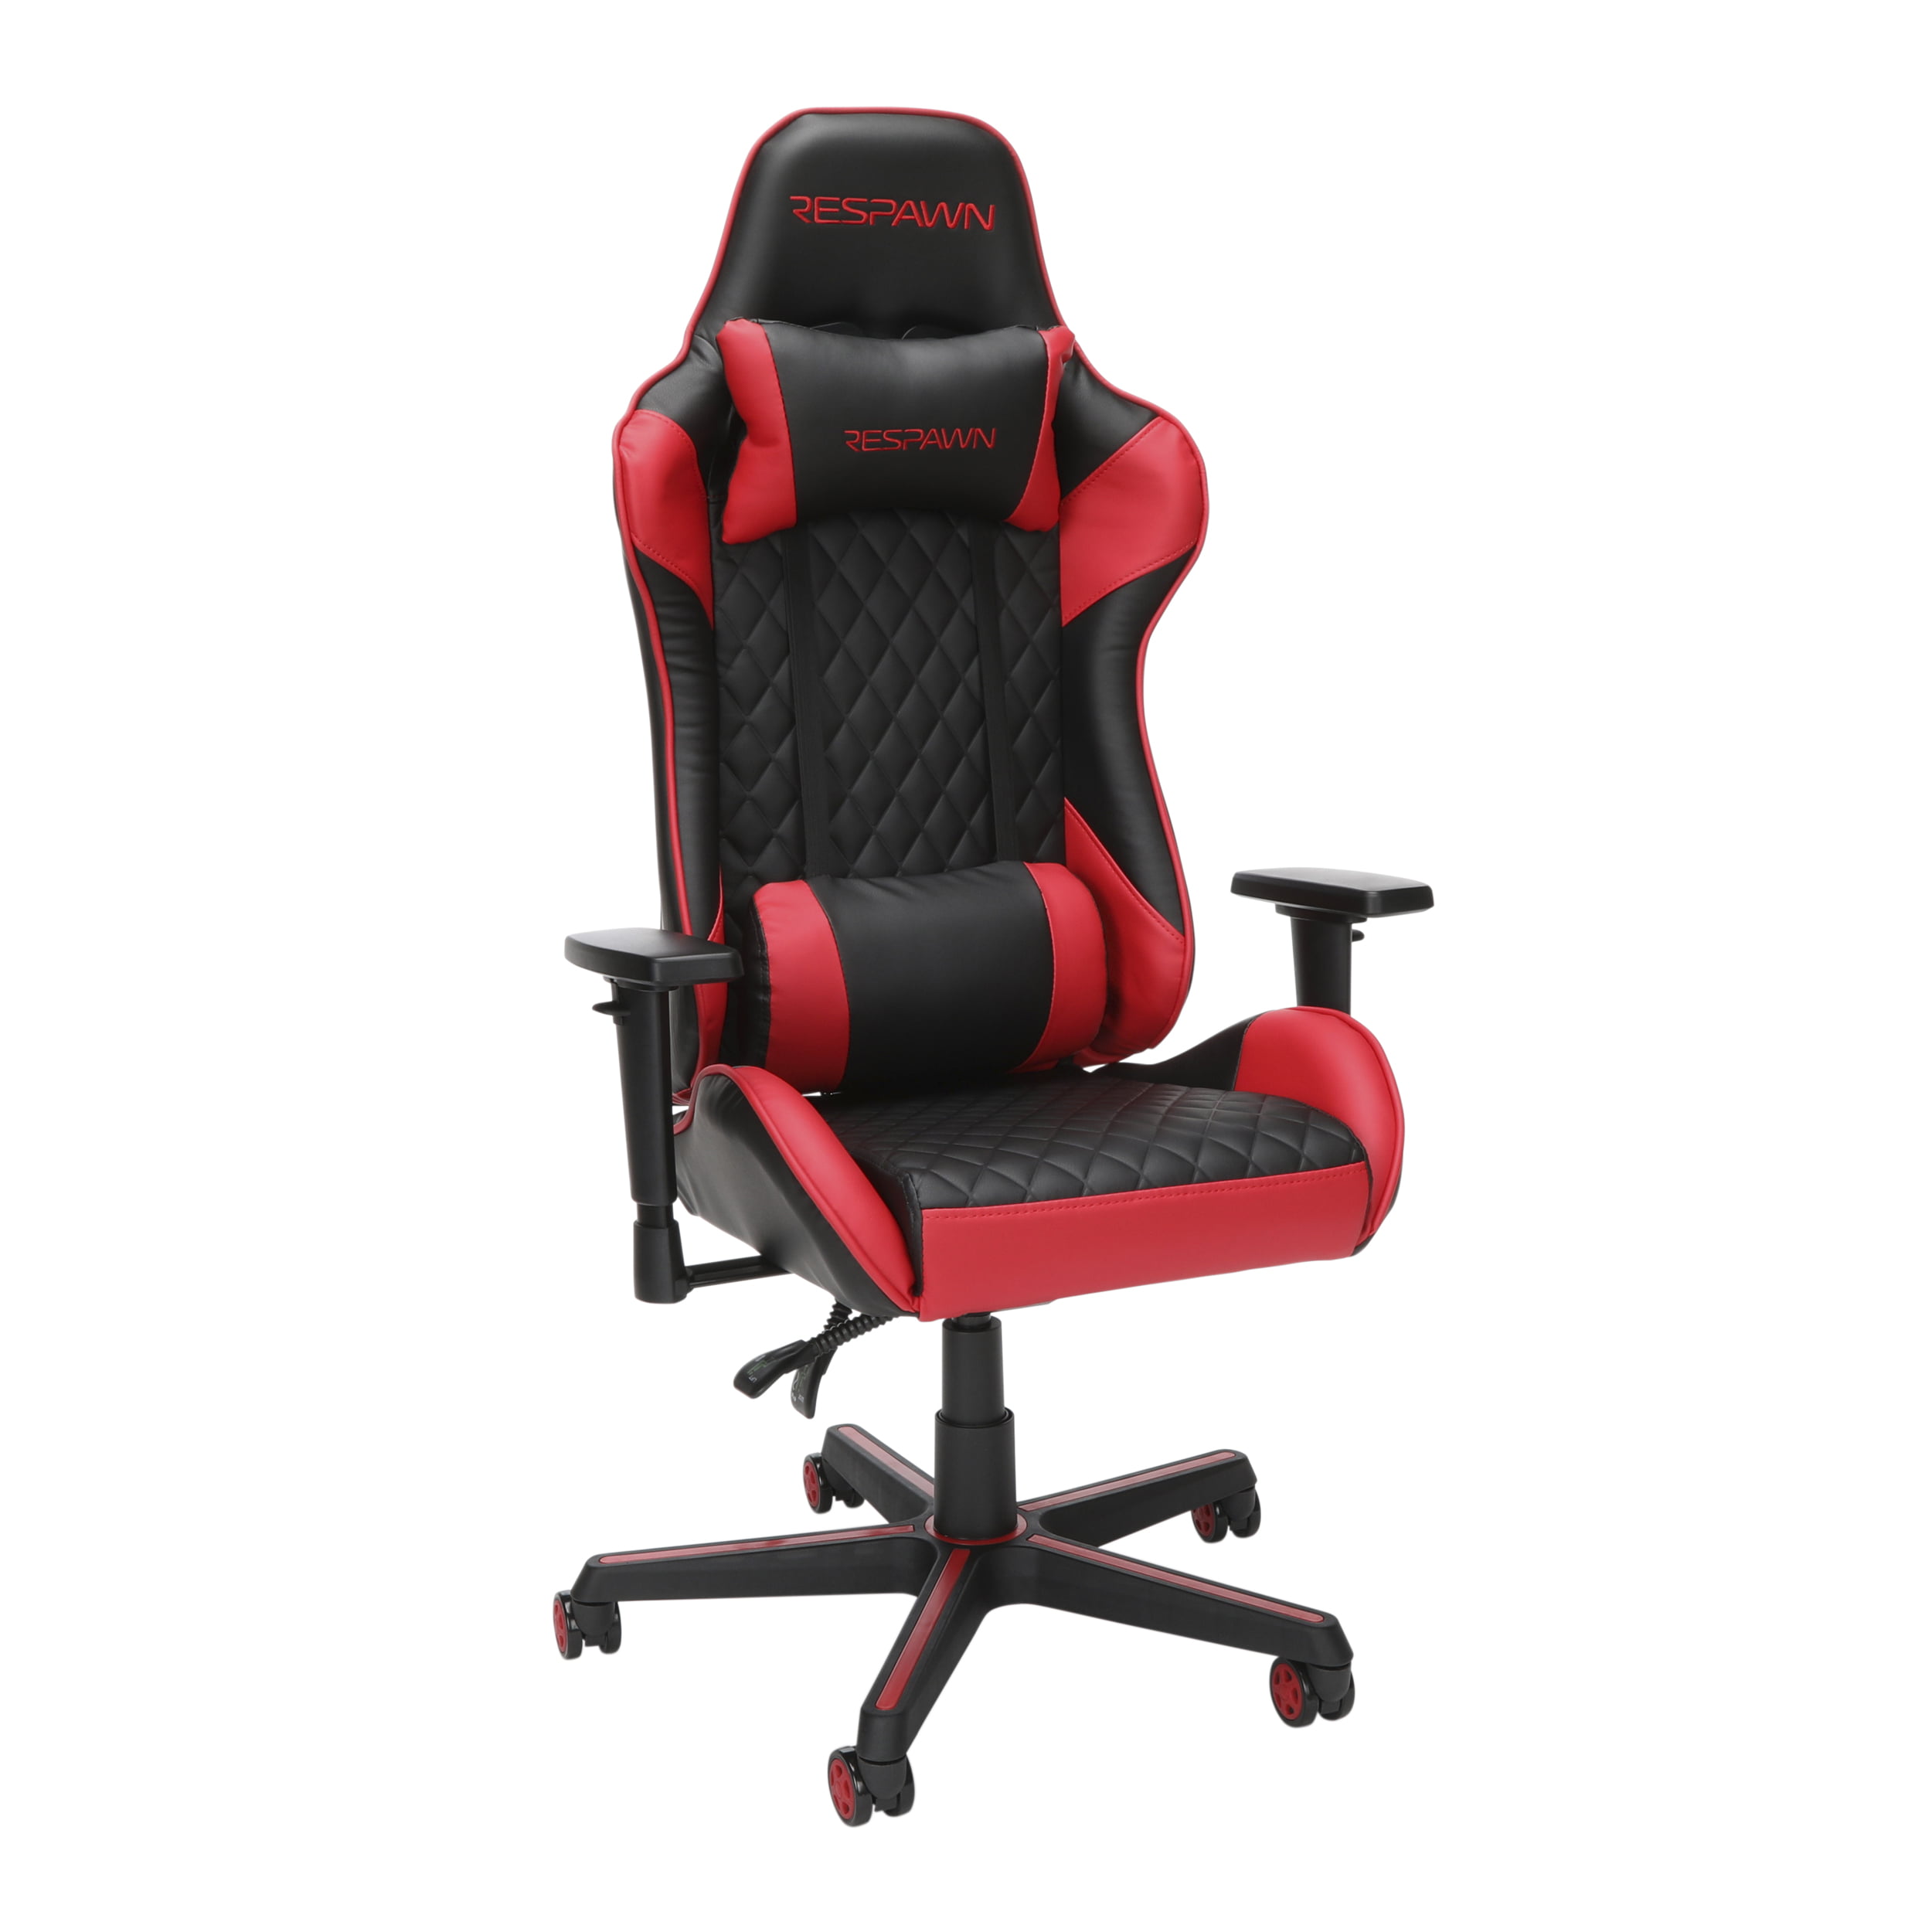 RESPAWN 100 Racing Style Gaming Chair, in Red (RSP-100-RED) - Walmart